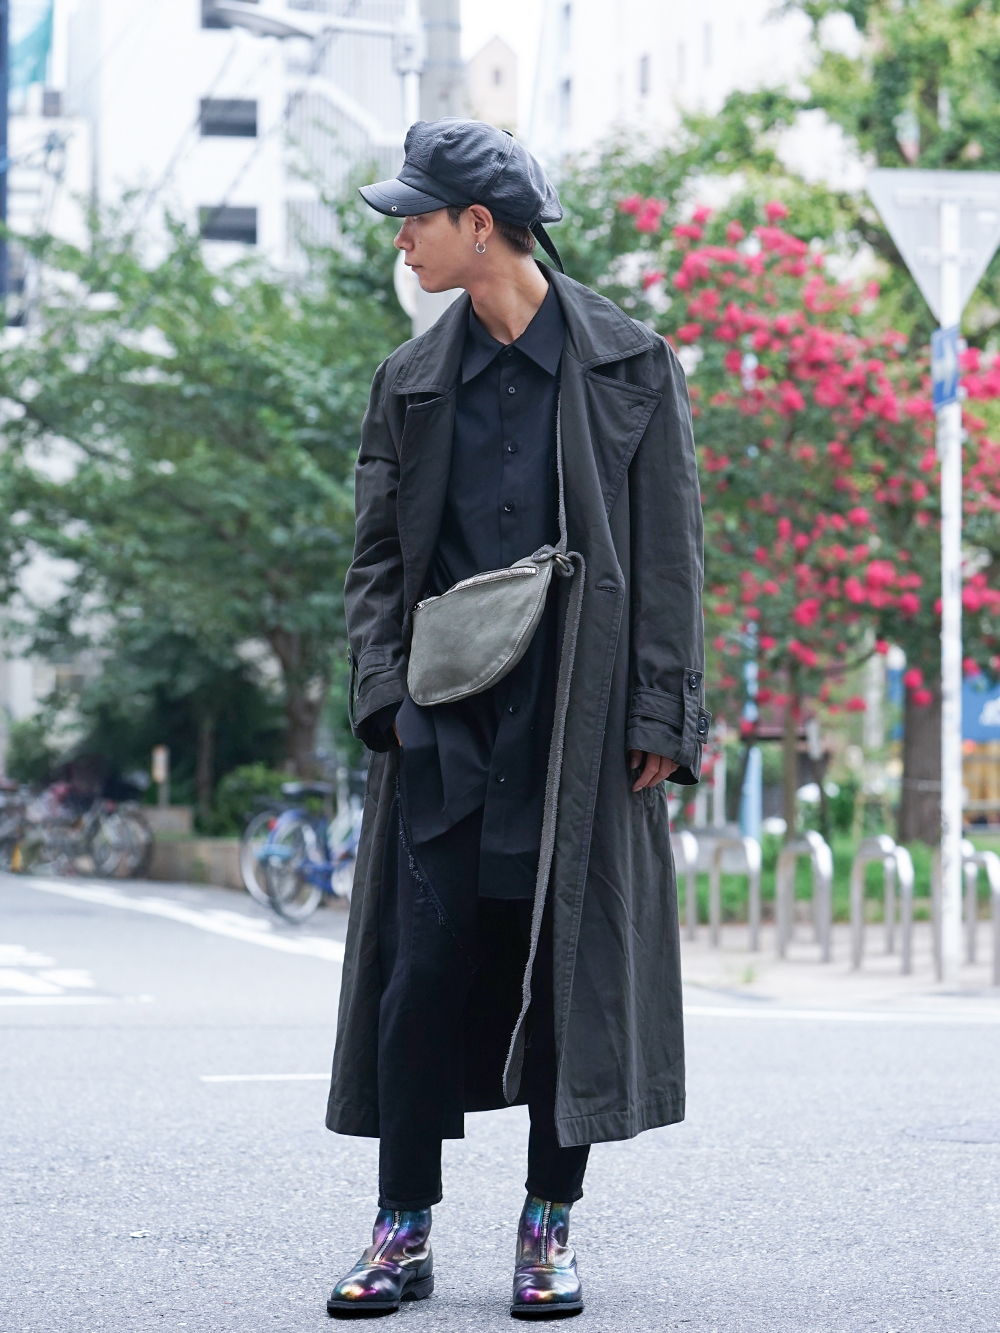 Ground Y × The Viridi-anne × GUIDI 19aw MIX Styling!! - FASCINATE BLOG